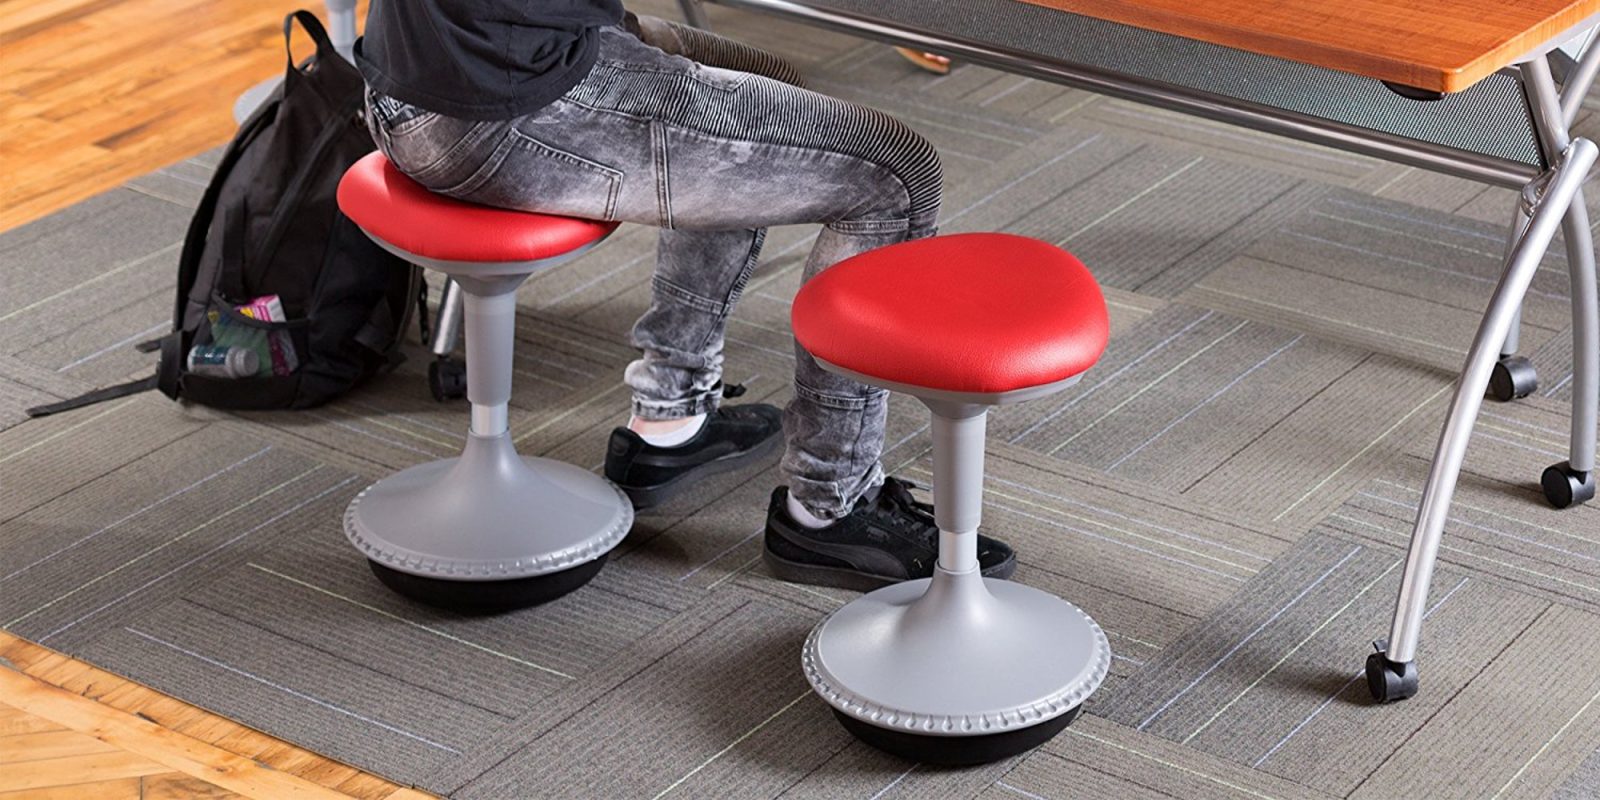 This leaning height-adjustable stool completes your standing desk setup